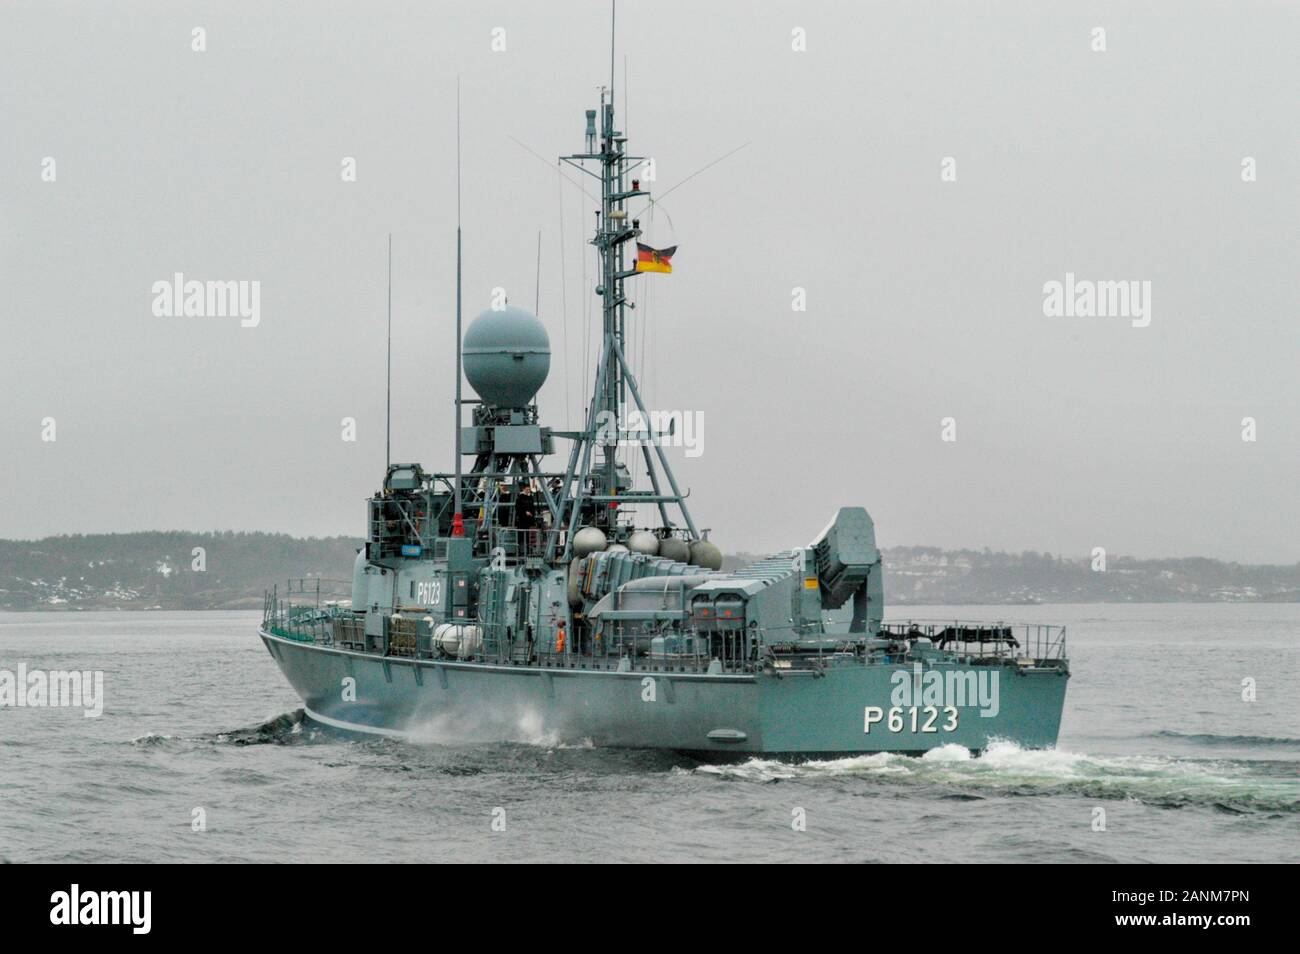 The Type 143A Gepard class fast attack missile craft 'S73 Hermelin' of the German Navy (Deutsche Marine) which was in service from 1983 to 2016. Seen here in Norwegian waters. Stock Photo